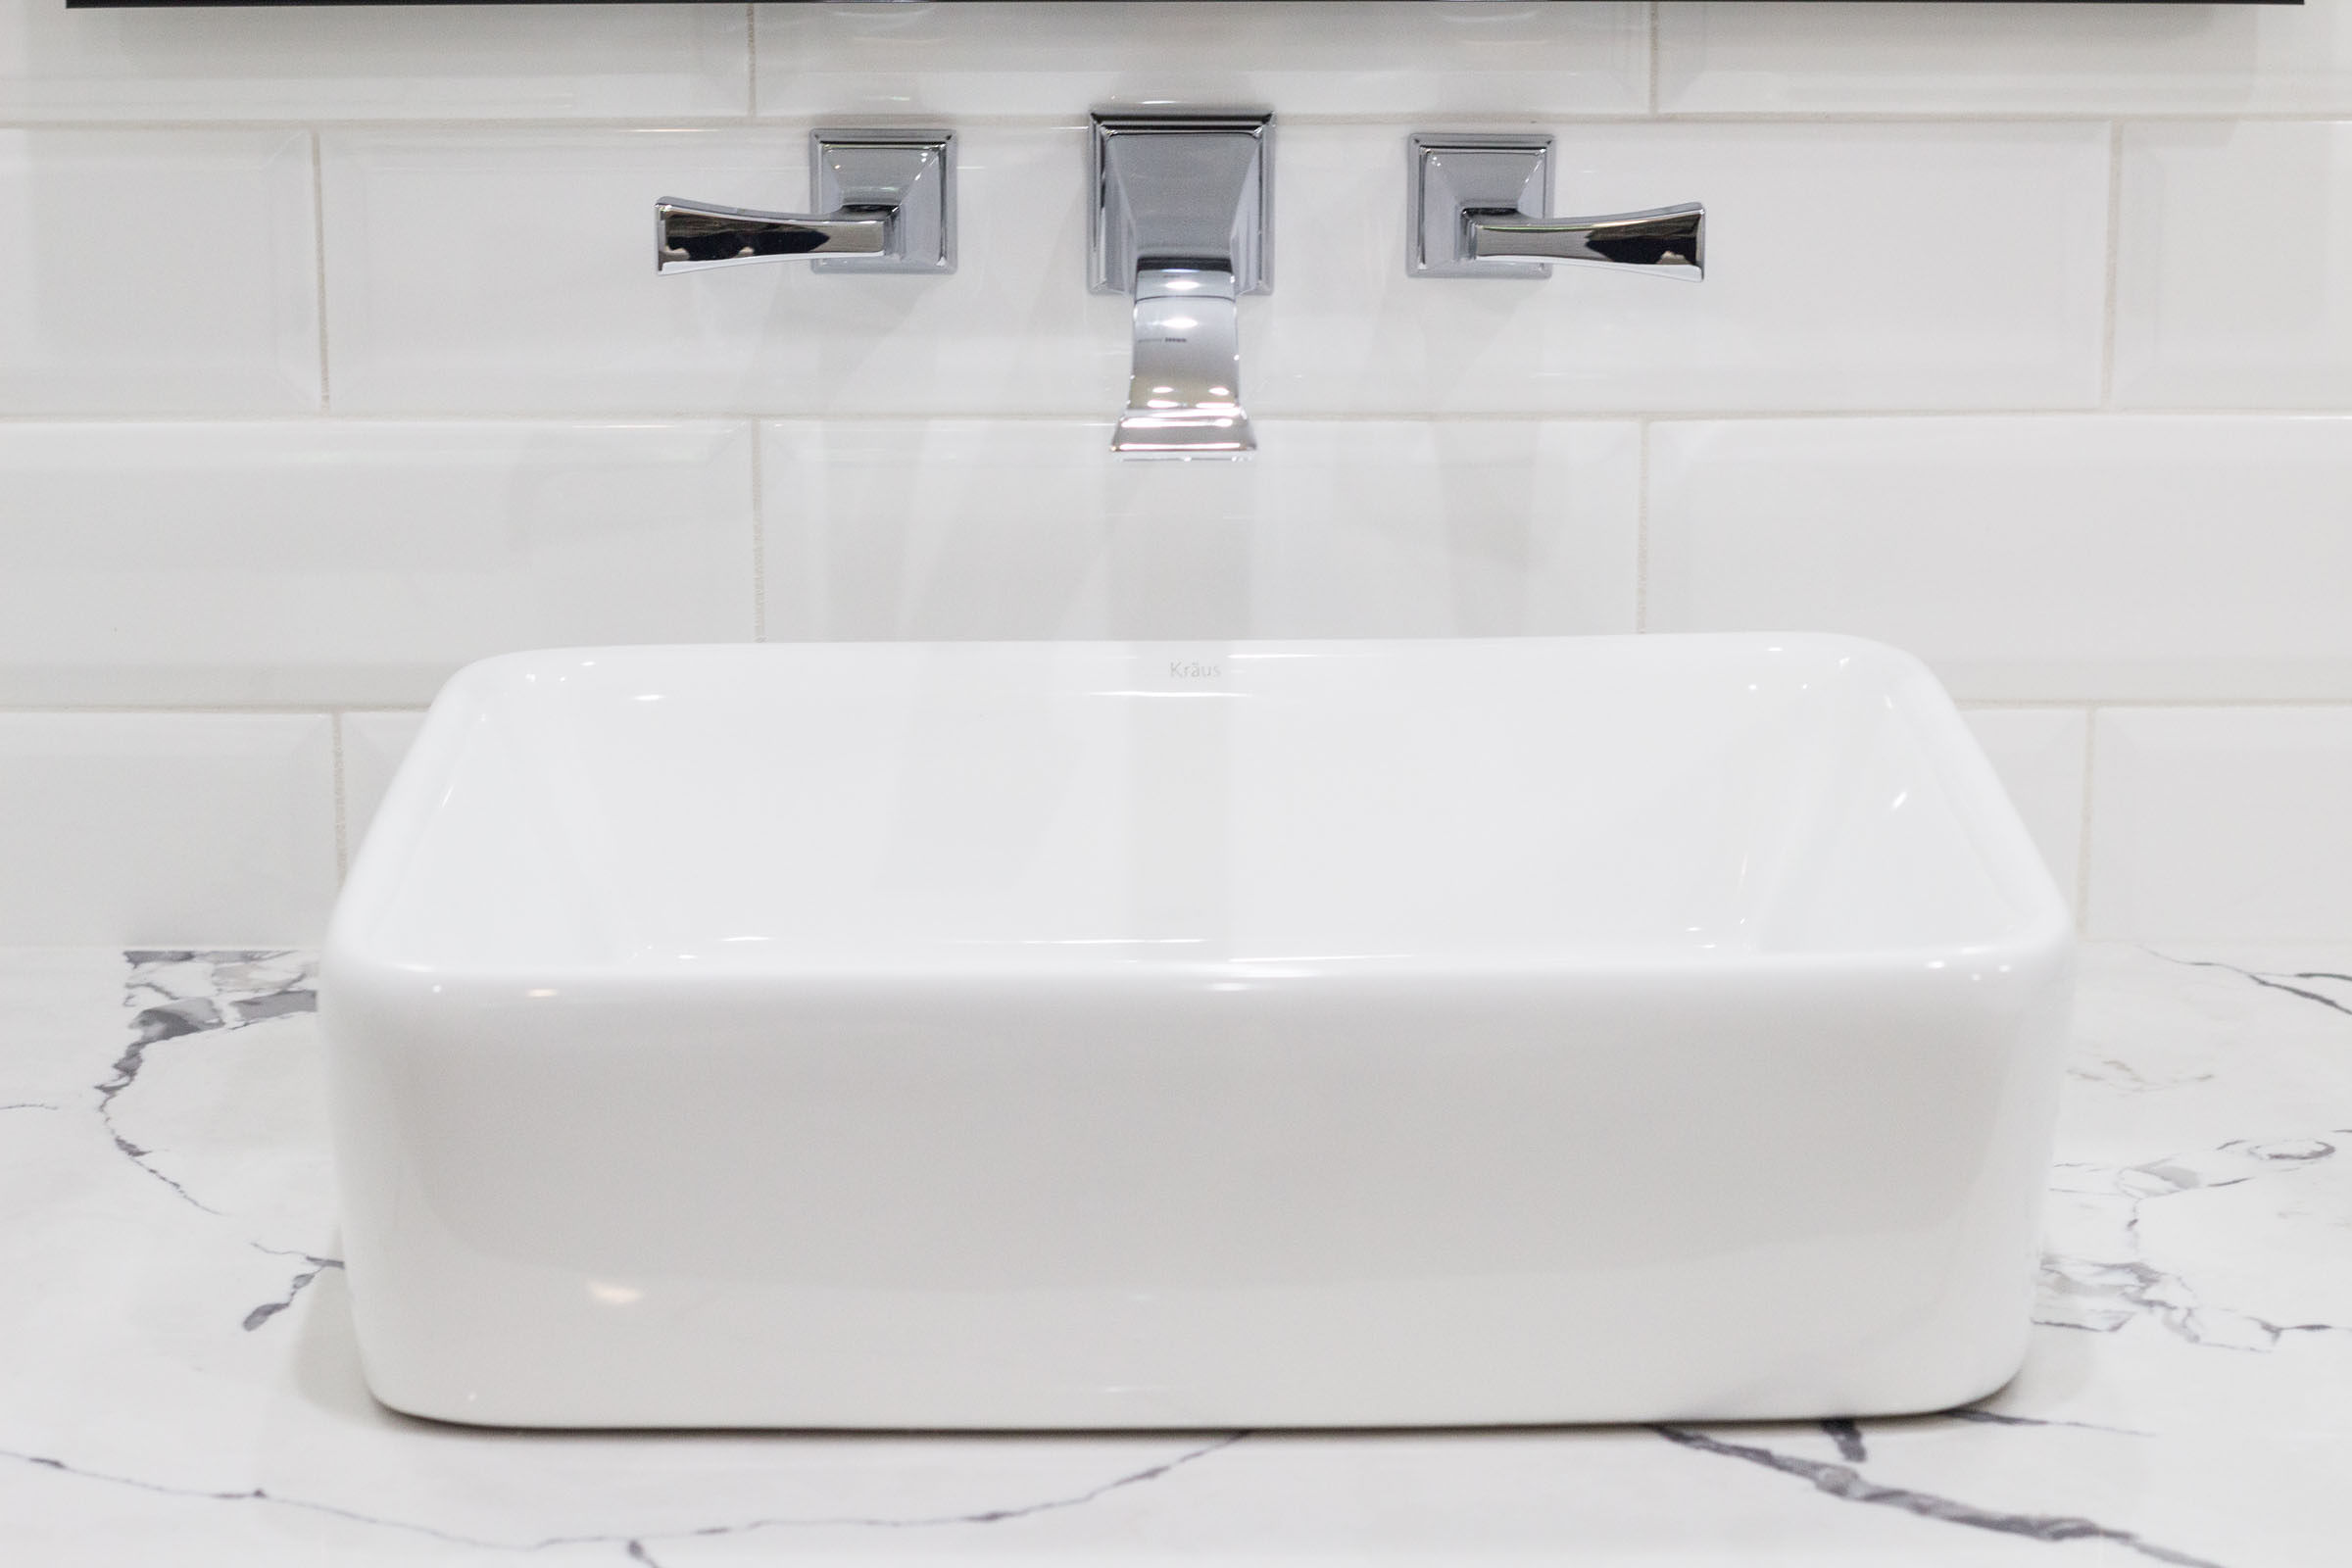 Countertop pedestal bathroom sink with white and grey granite, chrome sink faucet, and white subway tile backsplash